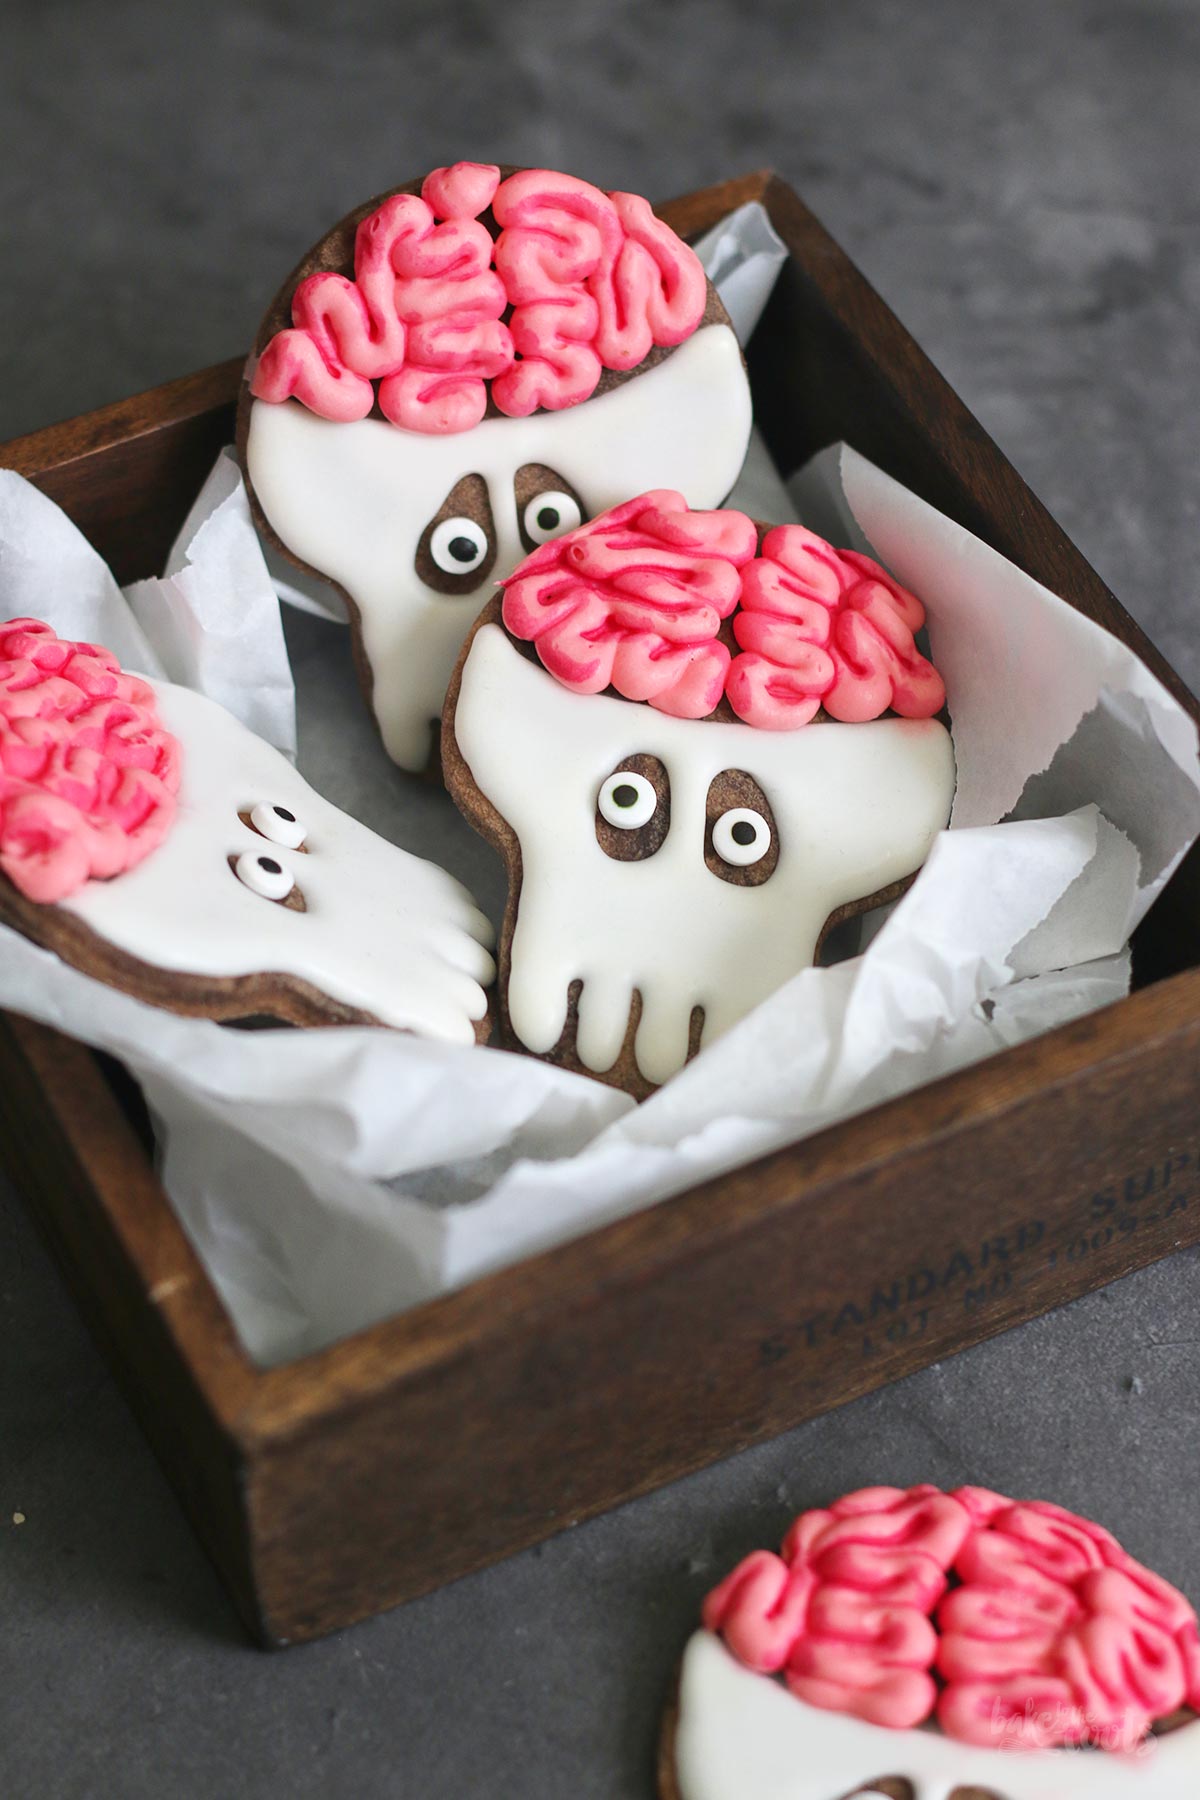 Halloween "Brainy" Skull Sugar Cookies | Bake to the roots